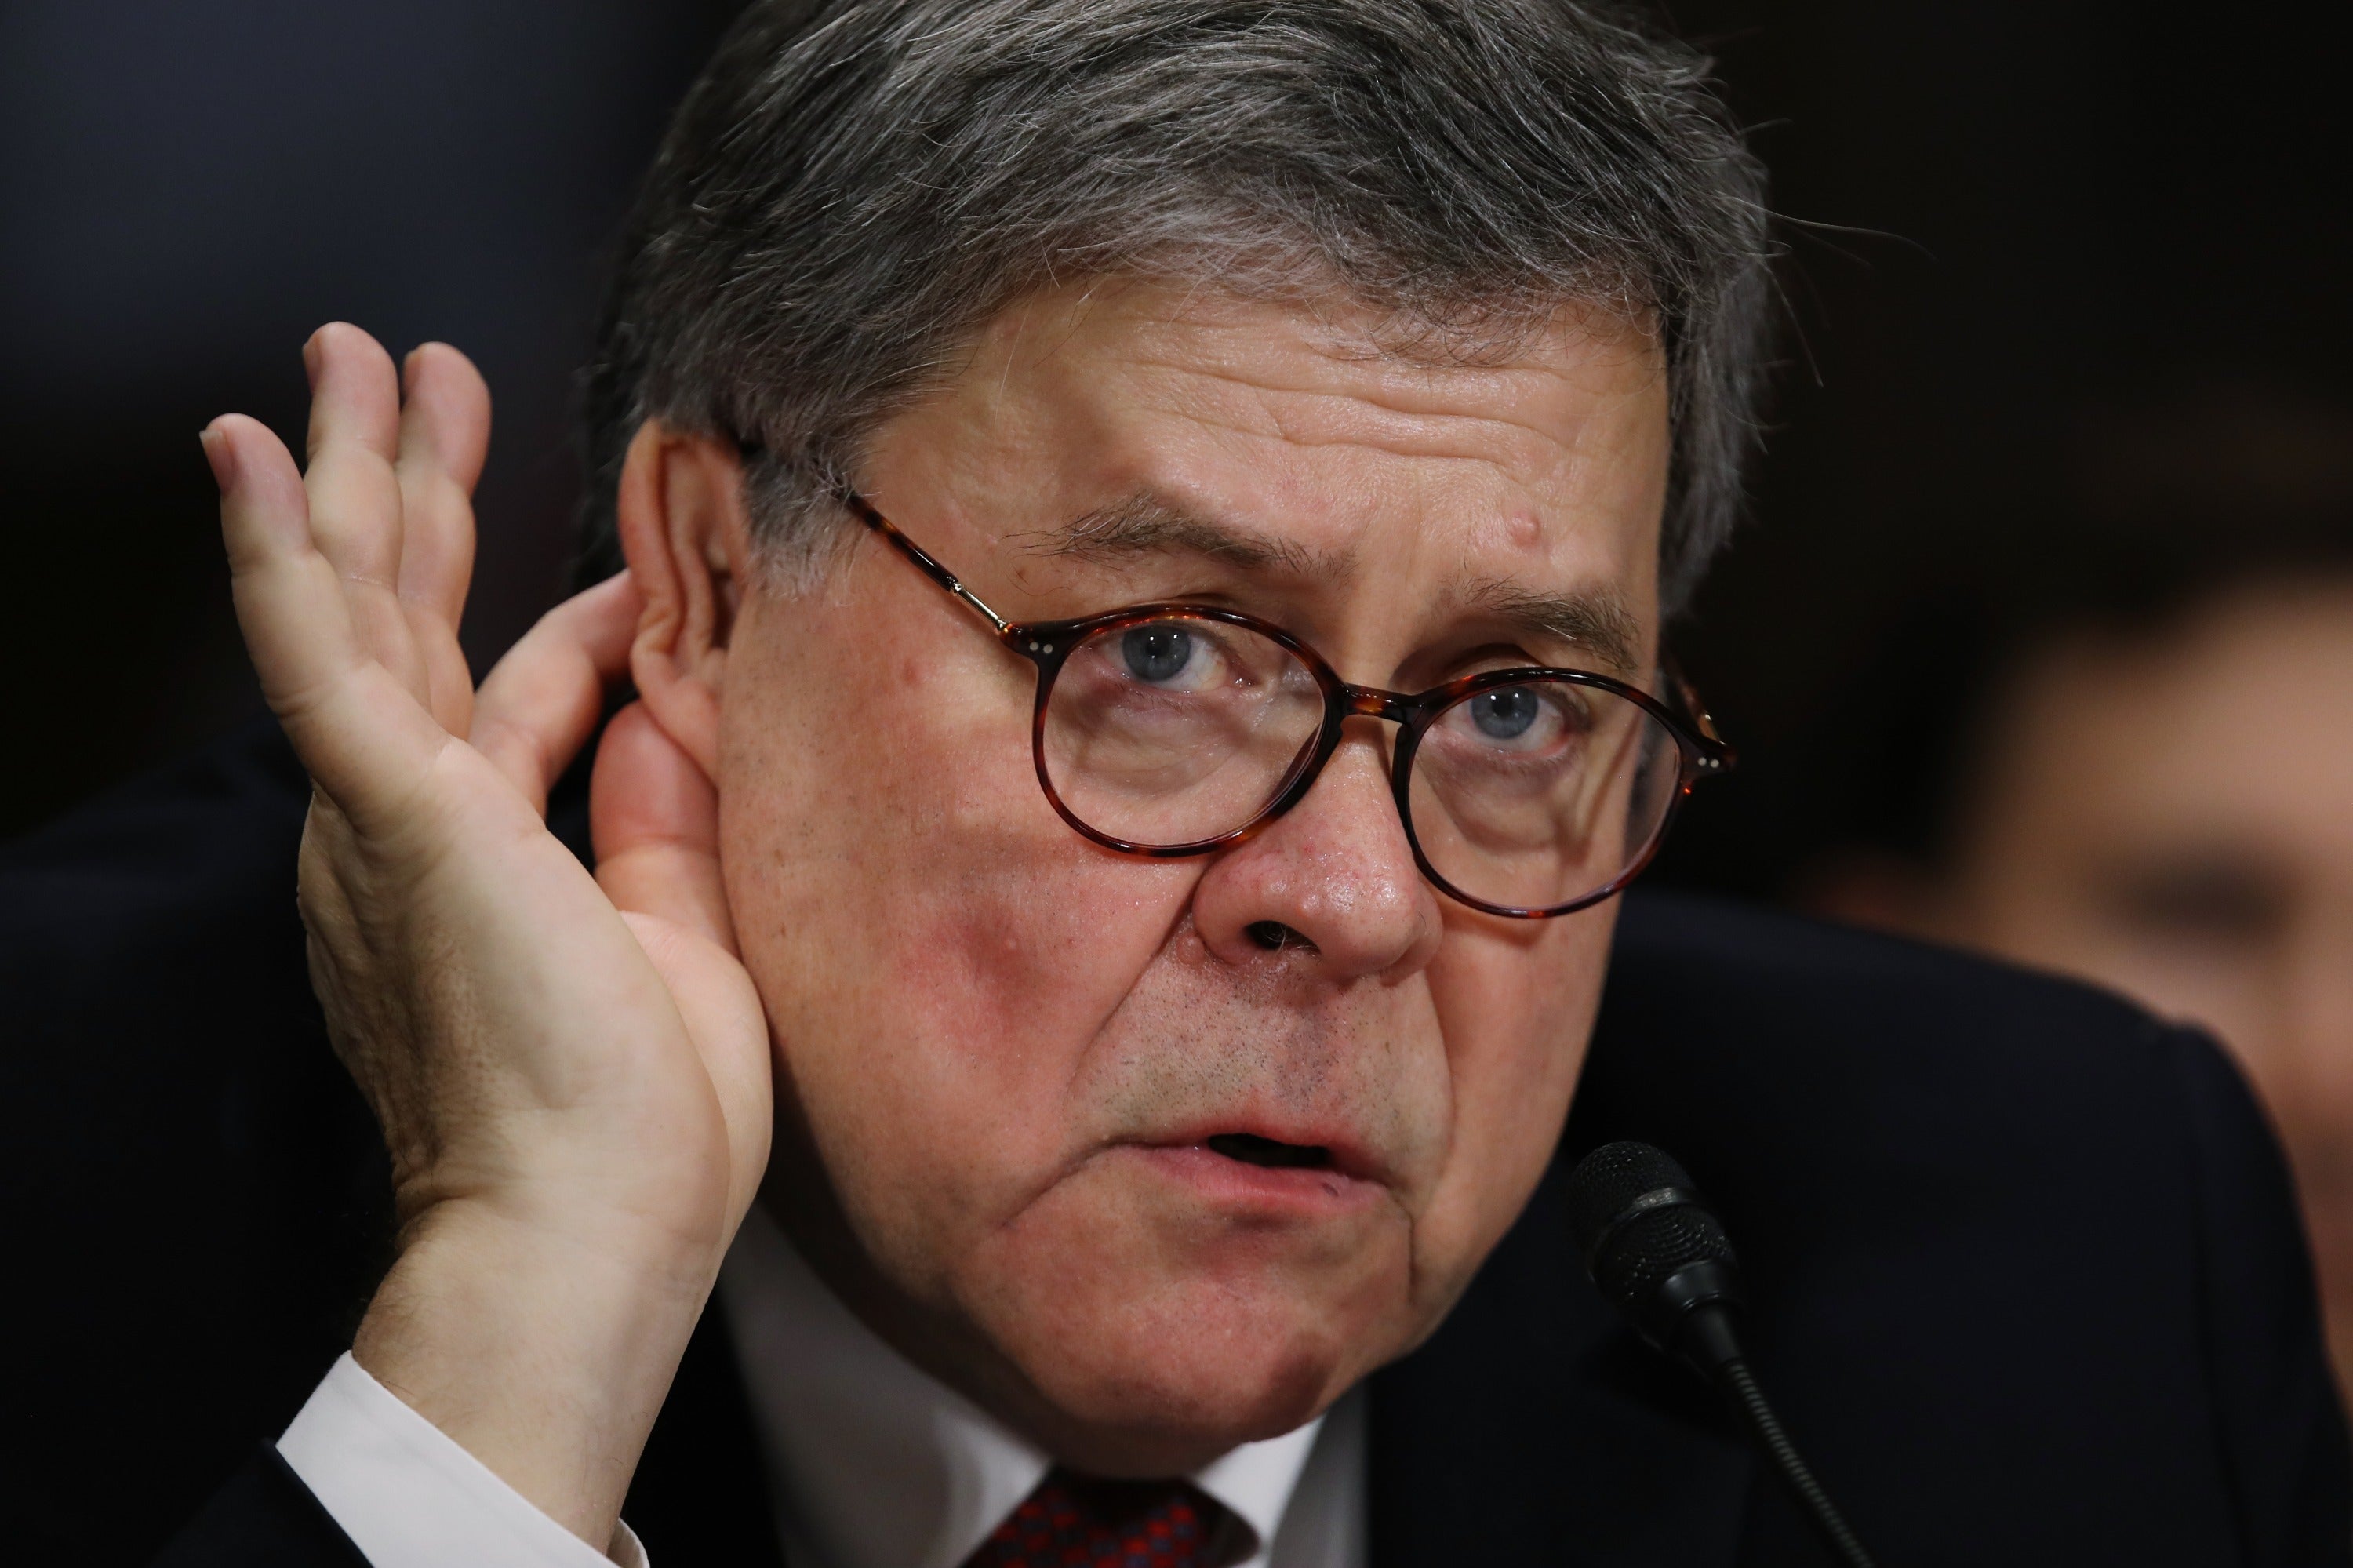 Donald Trump has refused to commit to bringing back attorney general William Barr if he secures a second term.